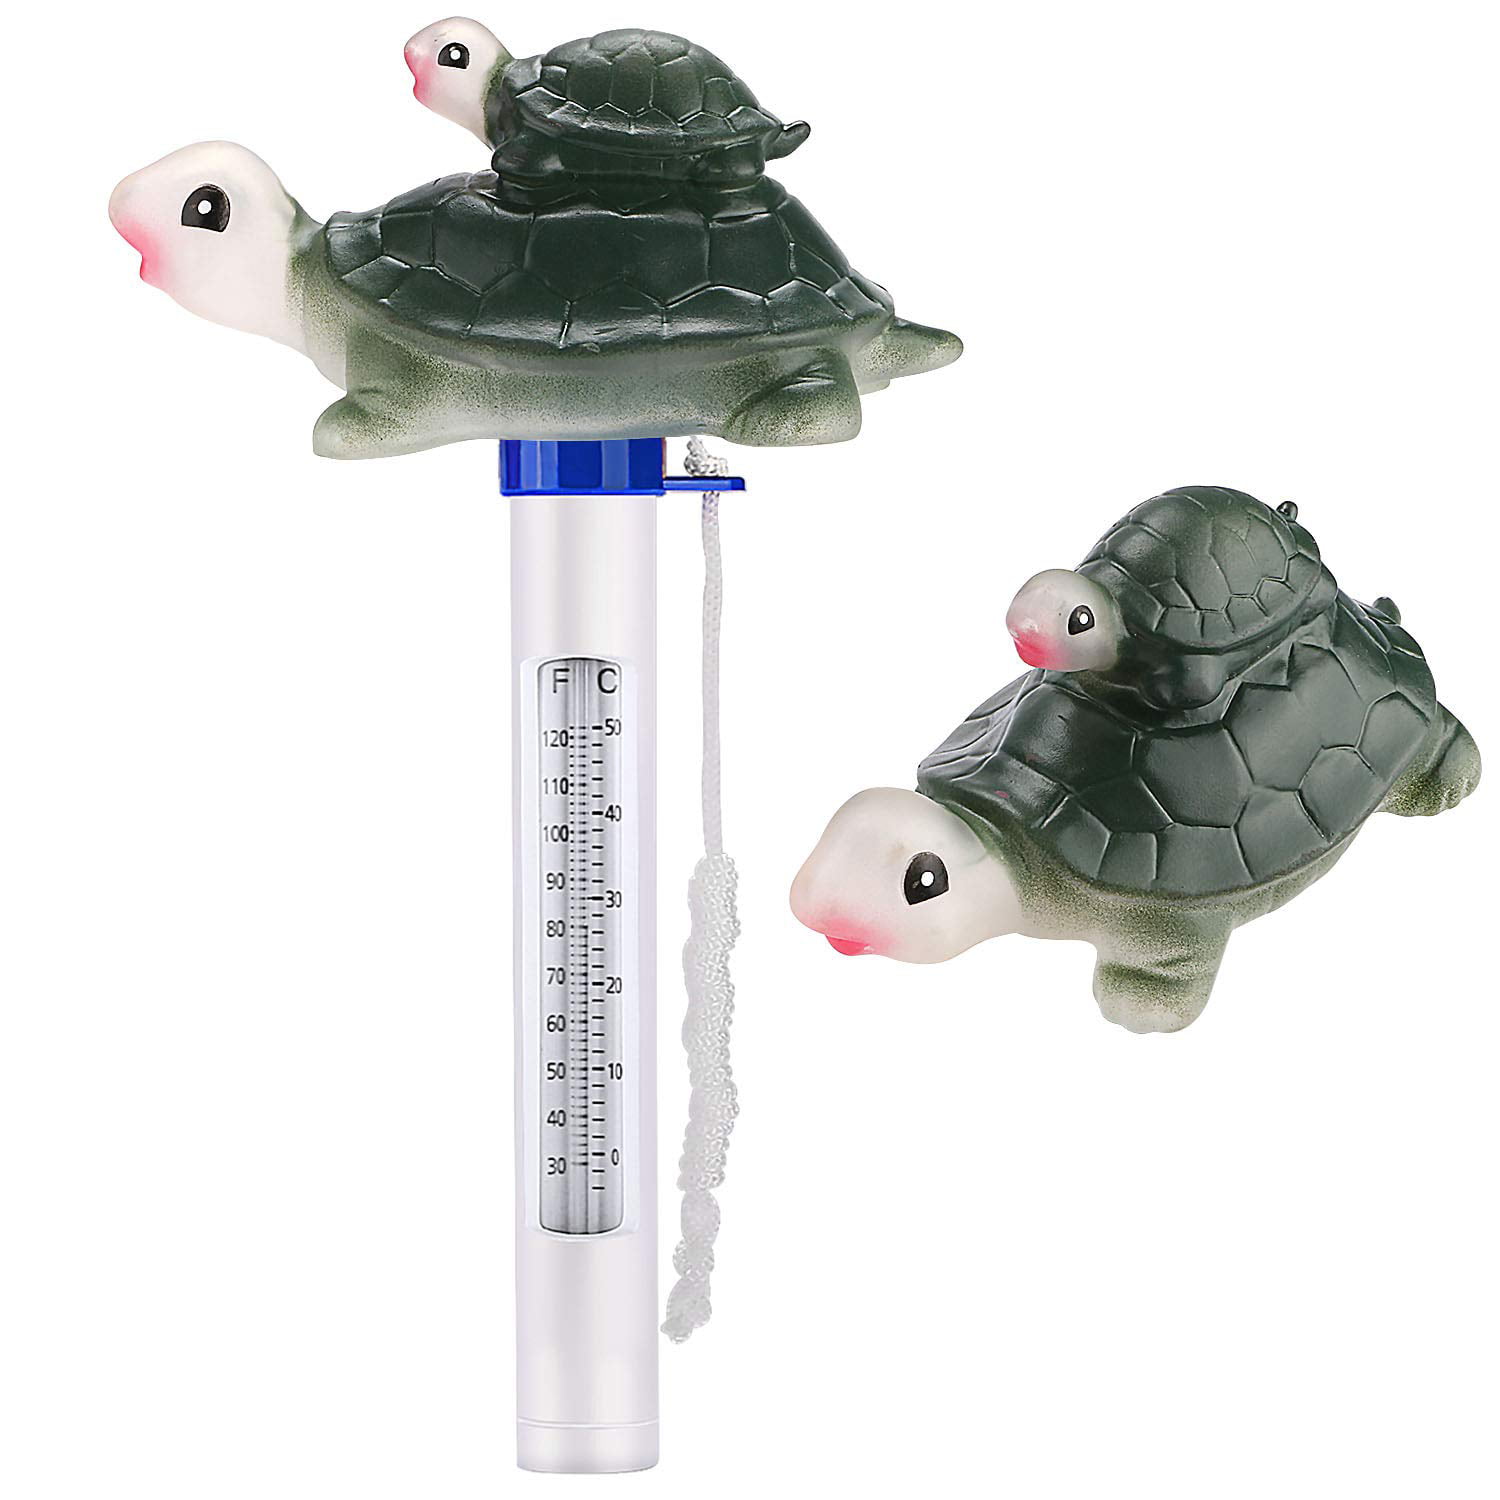 Turtle Floating Pool Thermometer Large Display Water Temperature Thermometers with String Swimming Pools Hot Tubs for Outdoor & Indoor Jacuzzis & Aquariums Shatter Resistant Spas